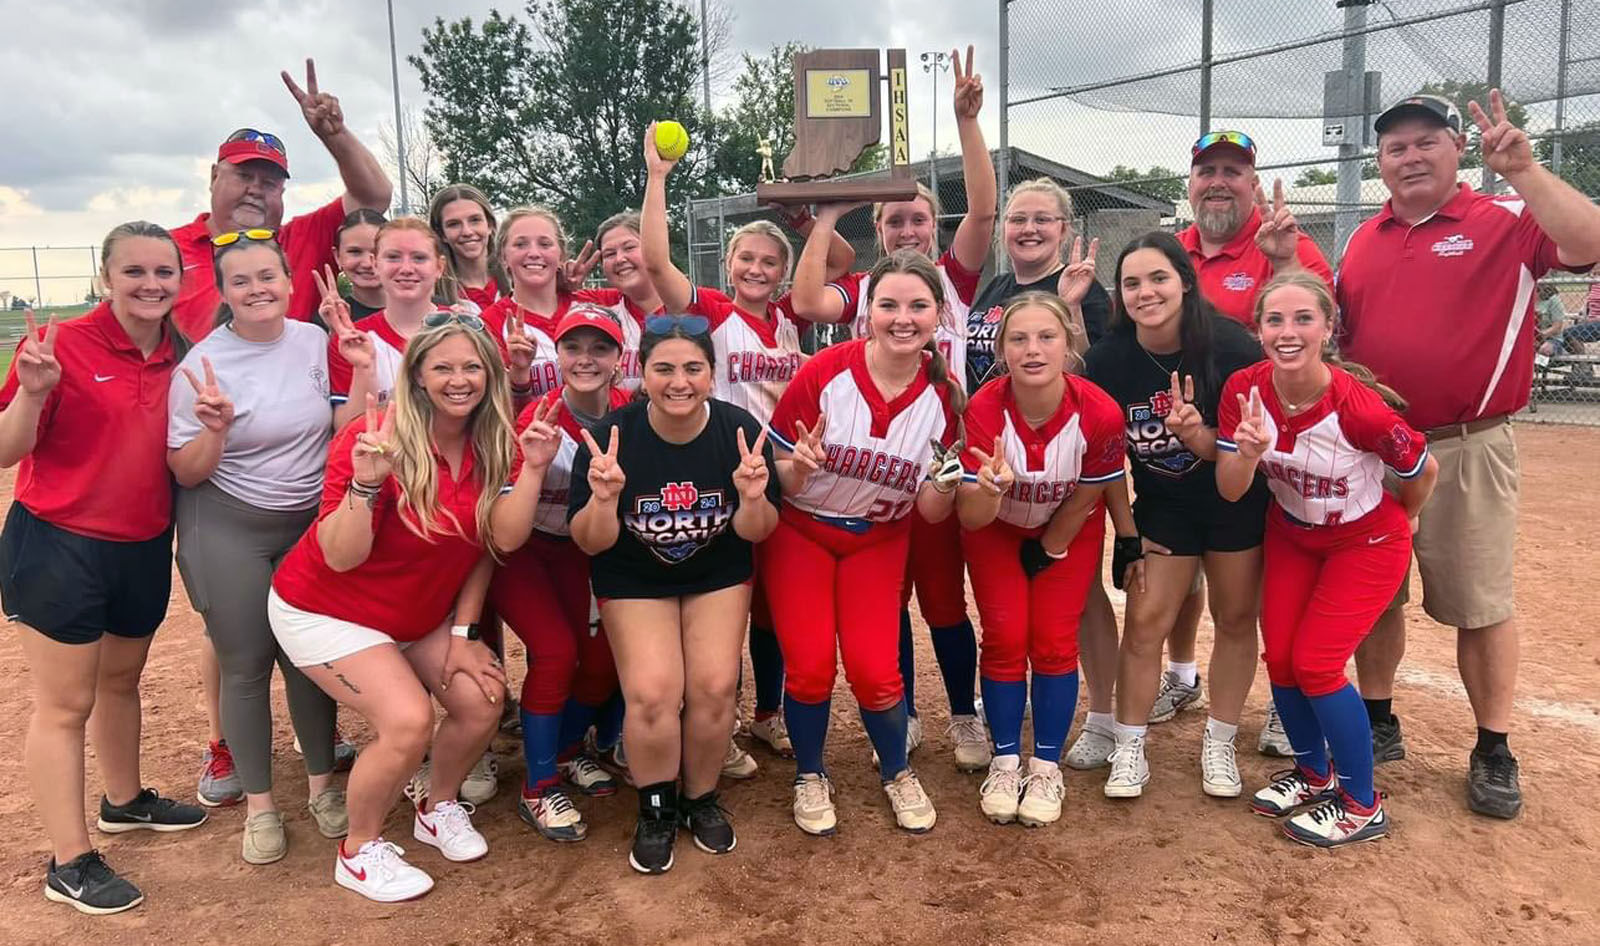 ND clinches second consecutive sectional title with 5-4 win over Jac-Cen-Del